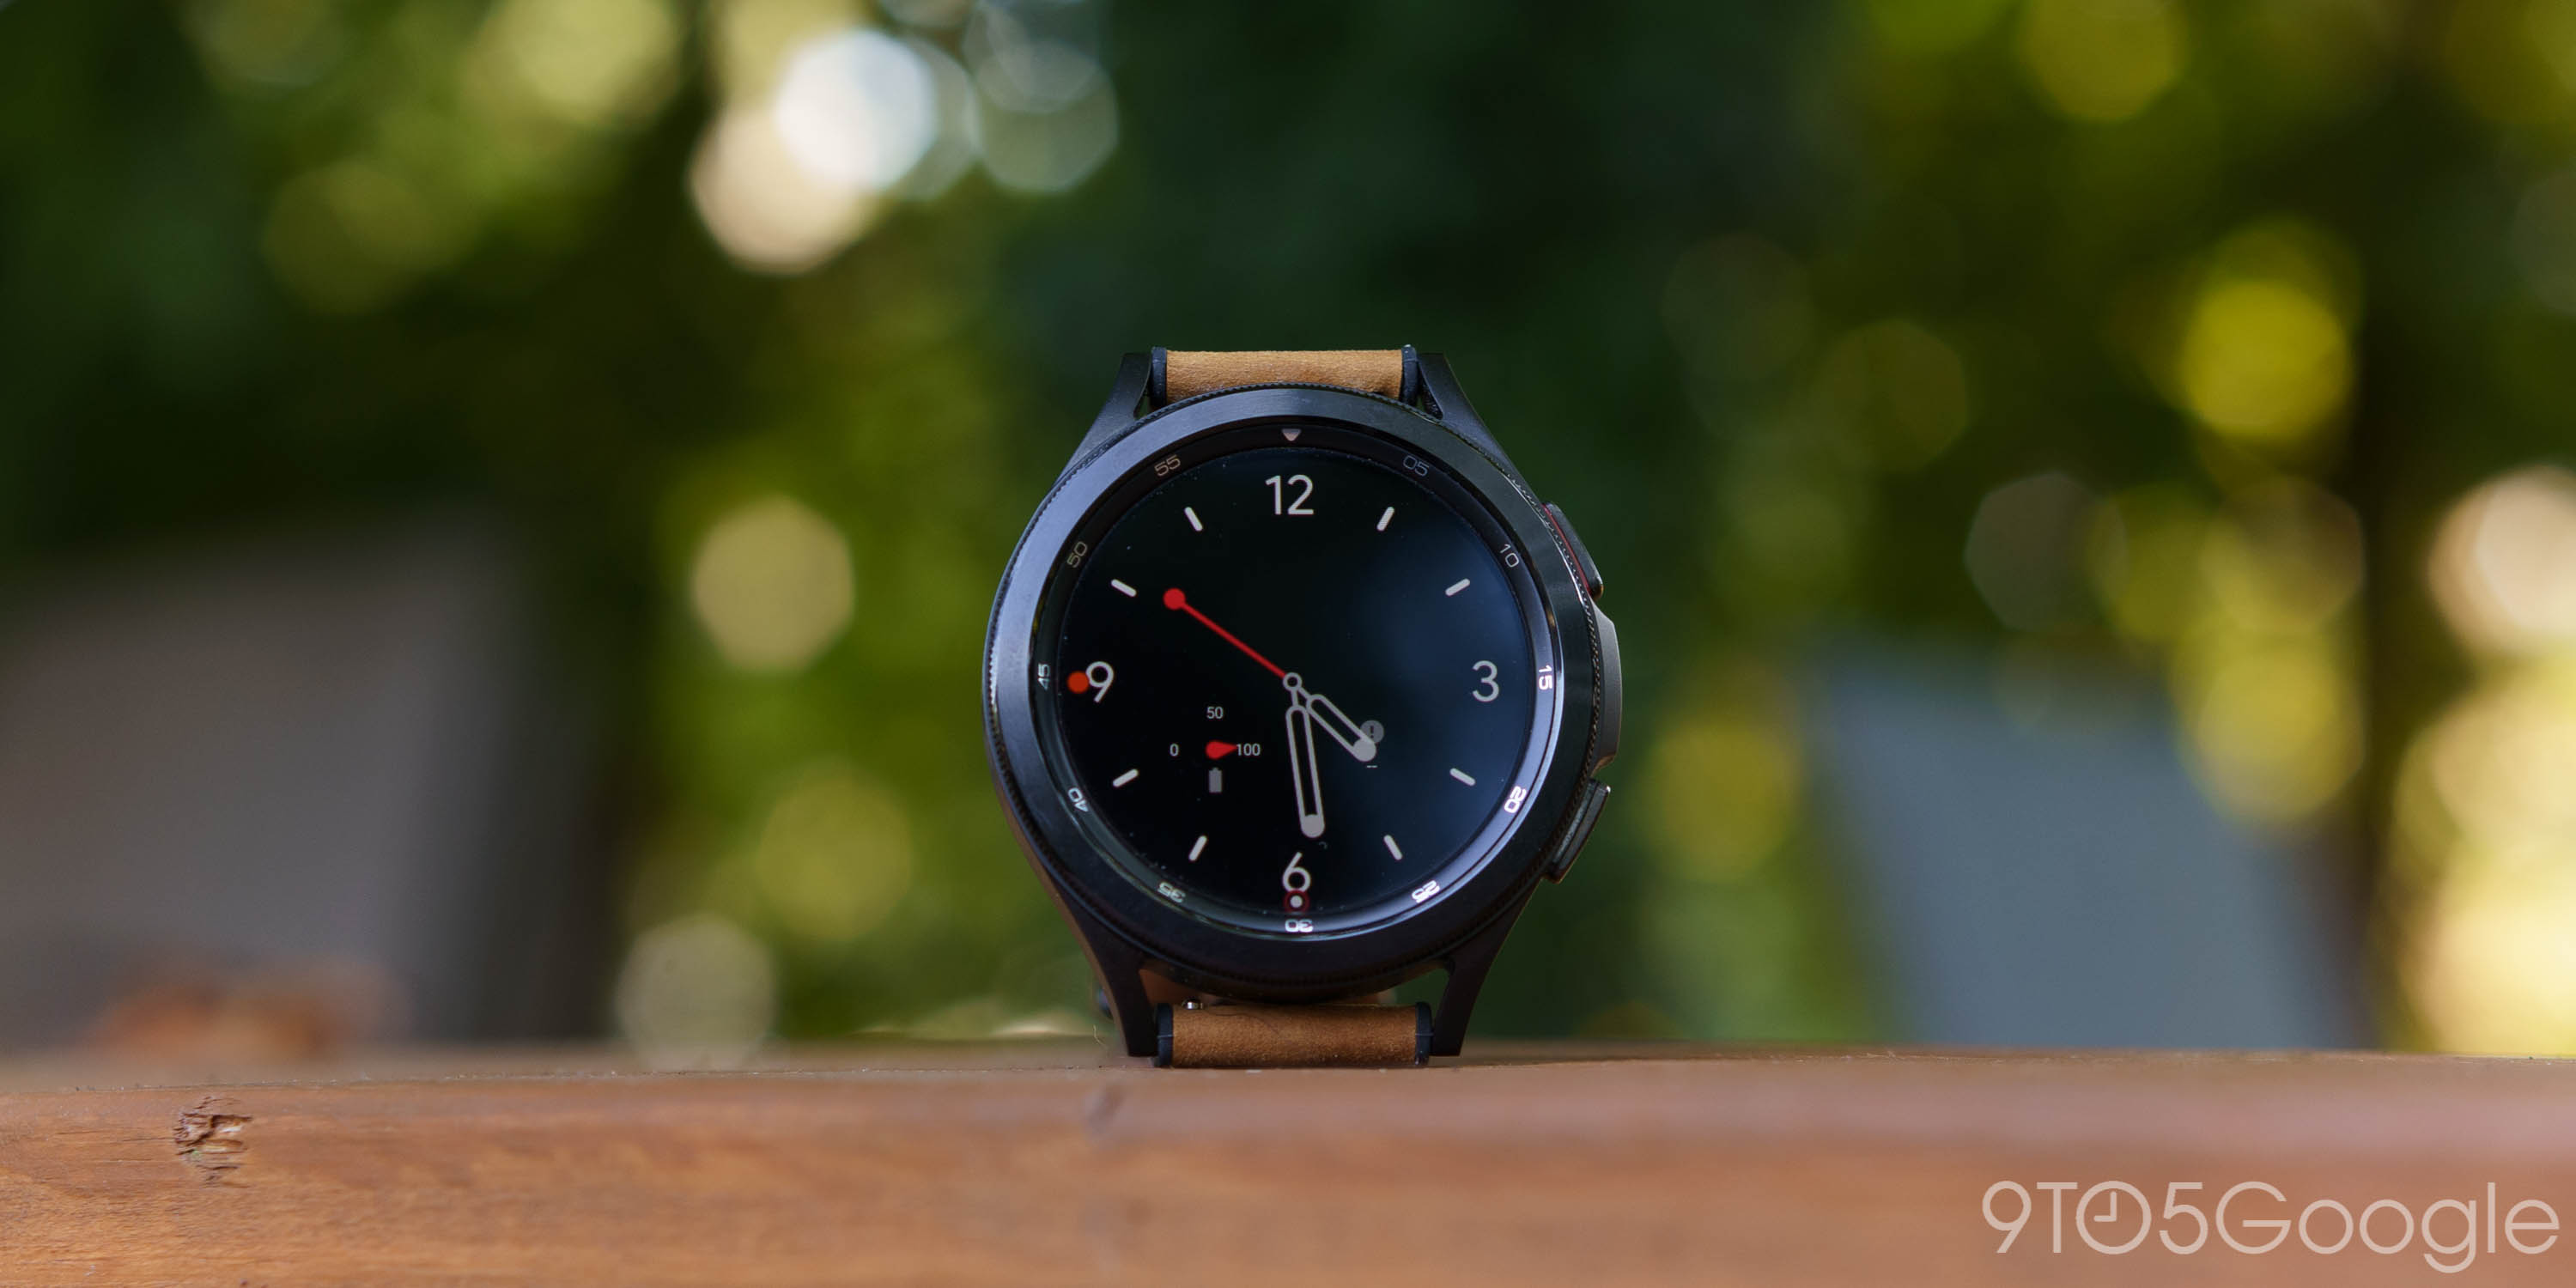 Om bus erindringer Best Android Smartwatches: Wear OS, Samsung, more - 9to5Google